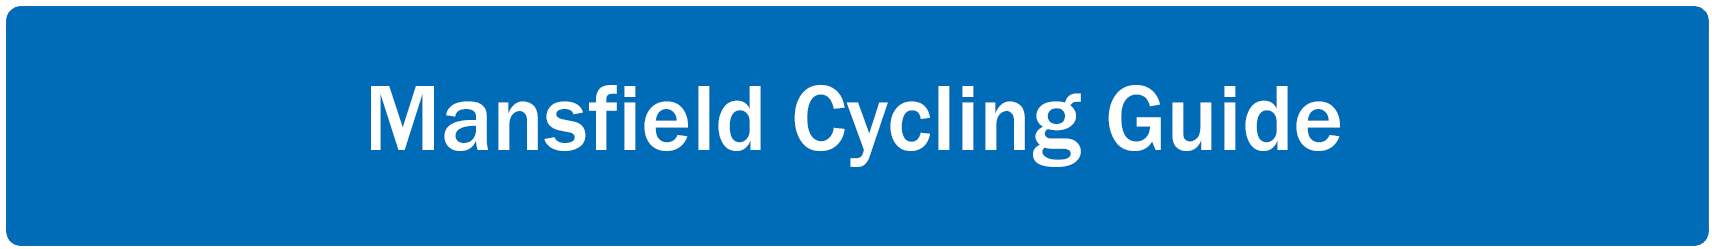 Mansfield Cycing Guide